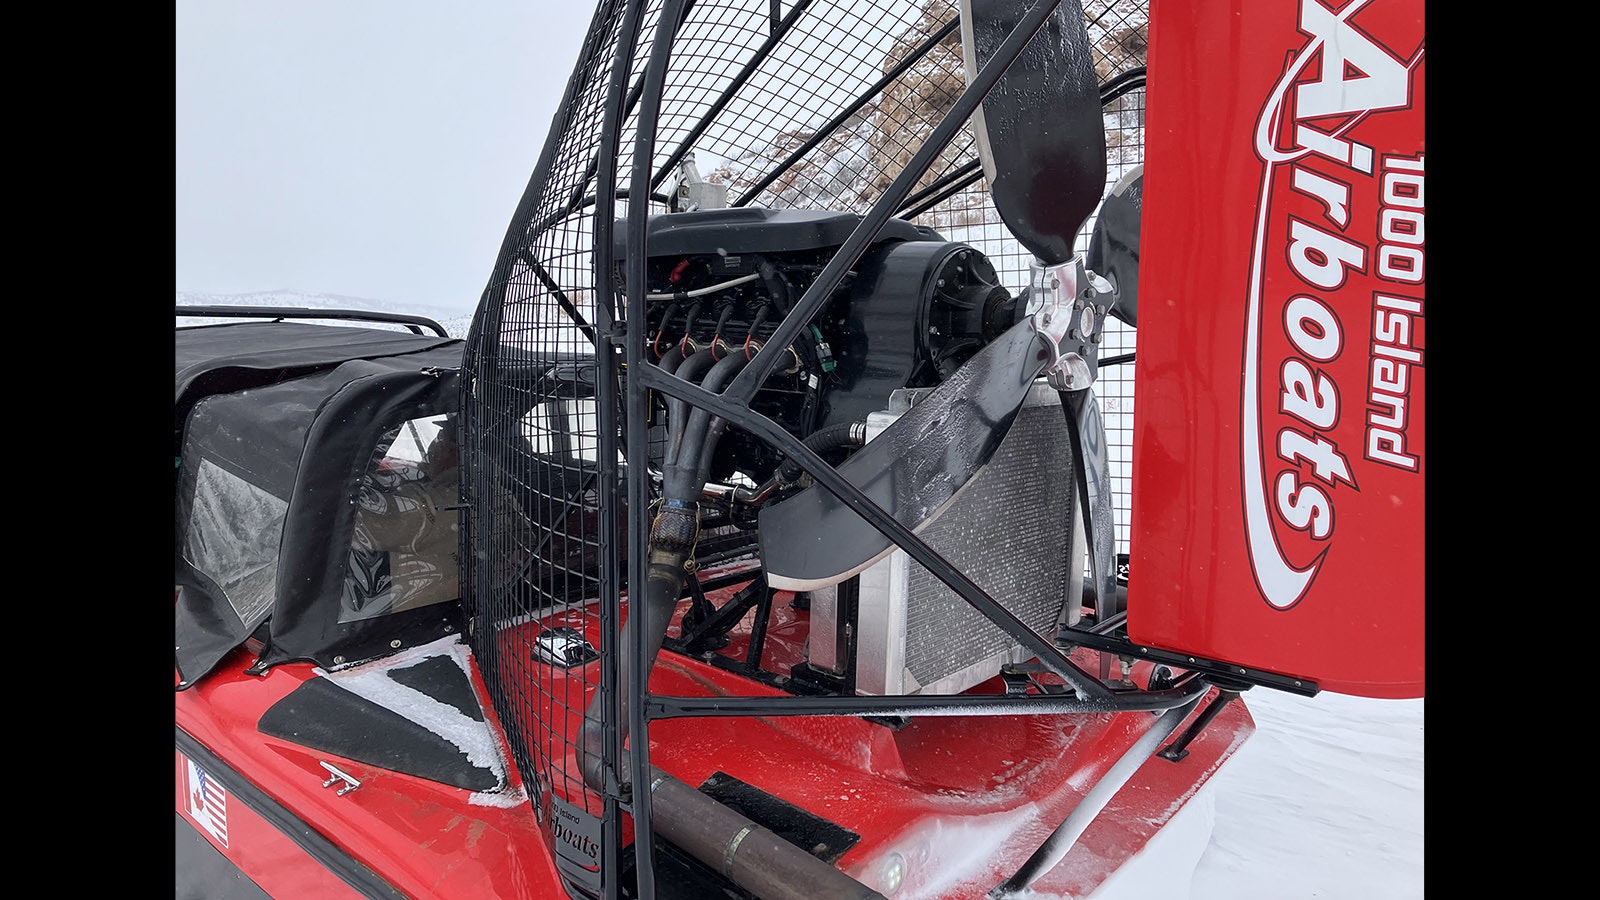 The airboat uses a big 550-horsepower GM engine to propel its blades.